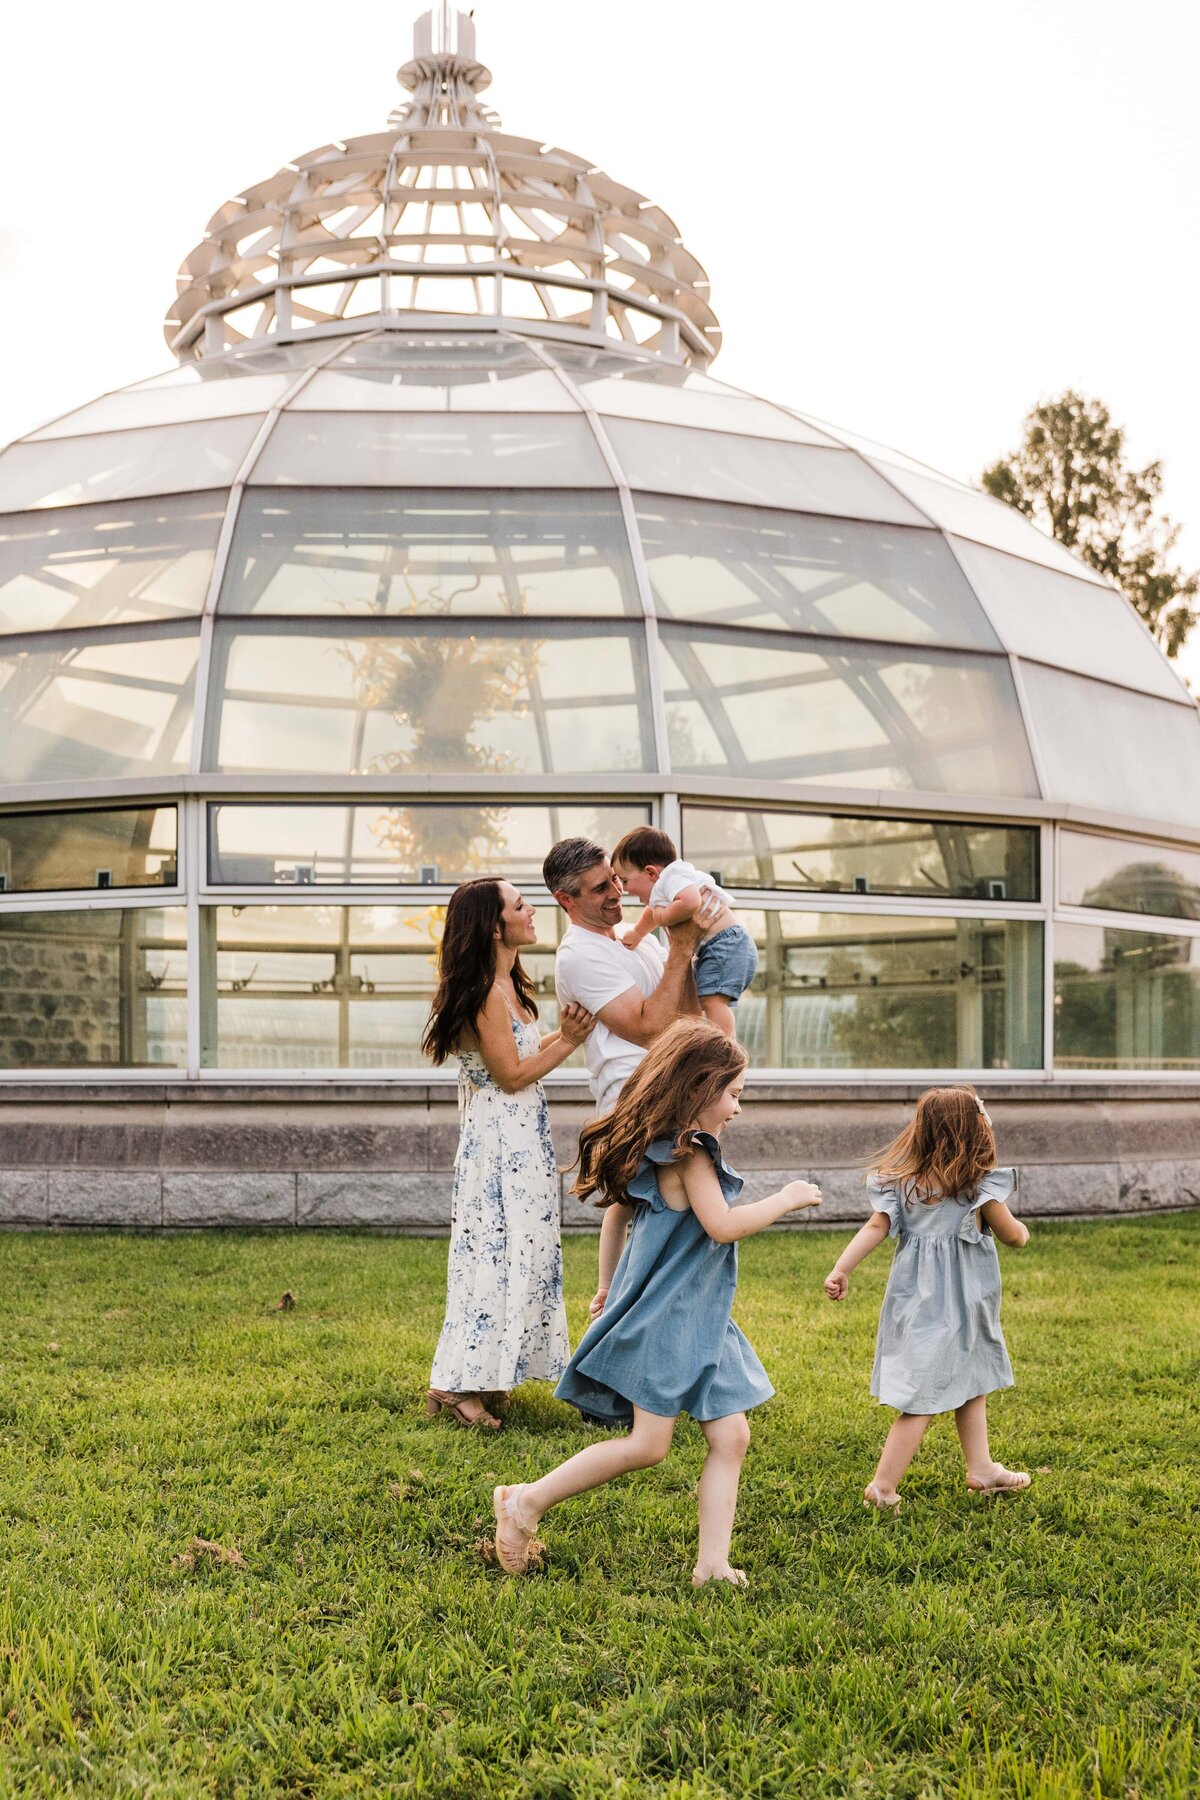 A Pittsburgh family of five enjoying a playful moment outdoors near a glass-domed structure.